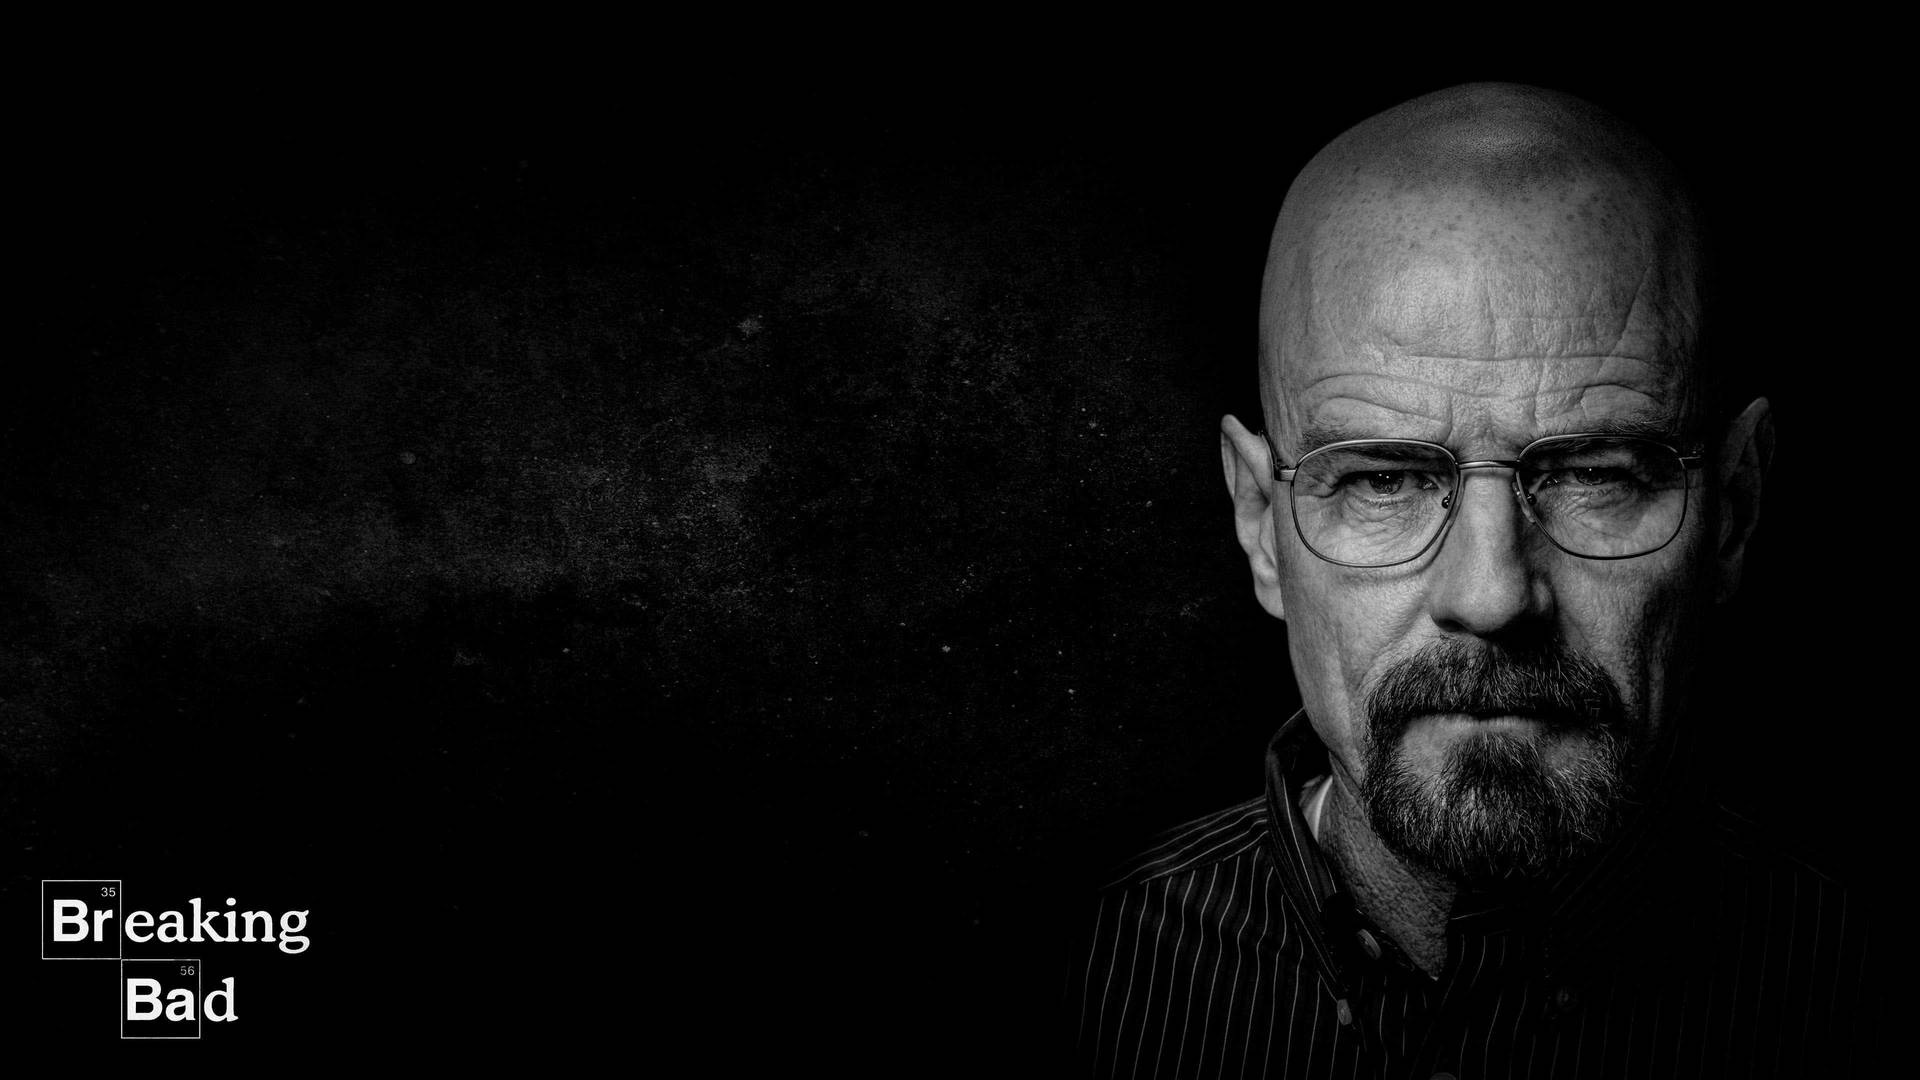 Walter White's life as a meth cook on Breaking Bad Wallpaper